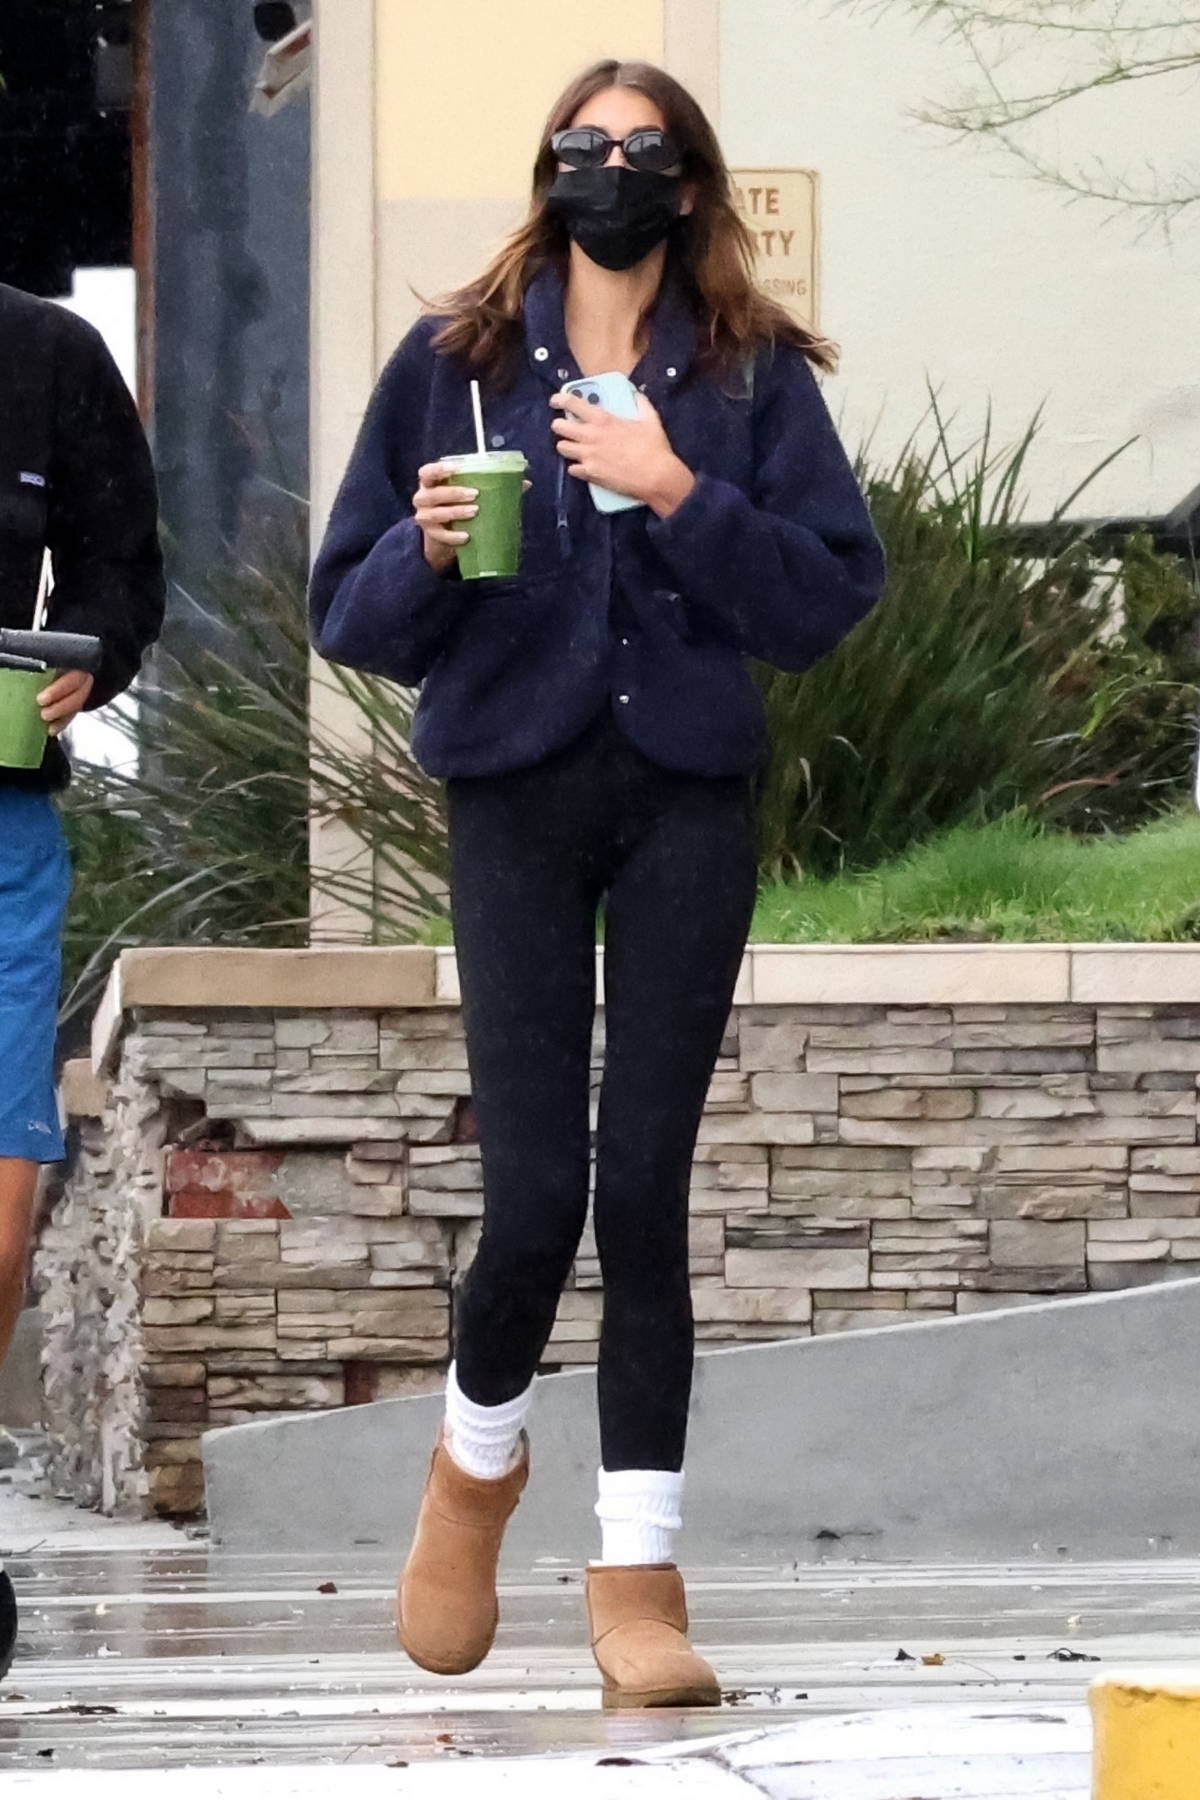 Alison Brie dons a Vans sweater and matching leggings as she exits